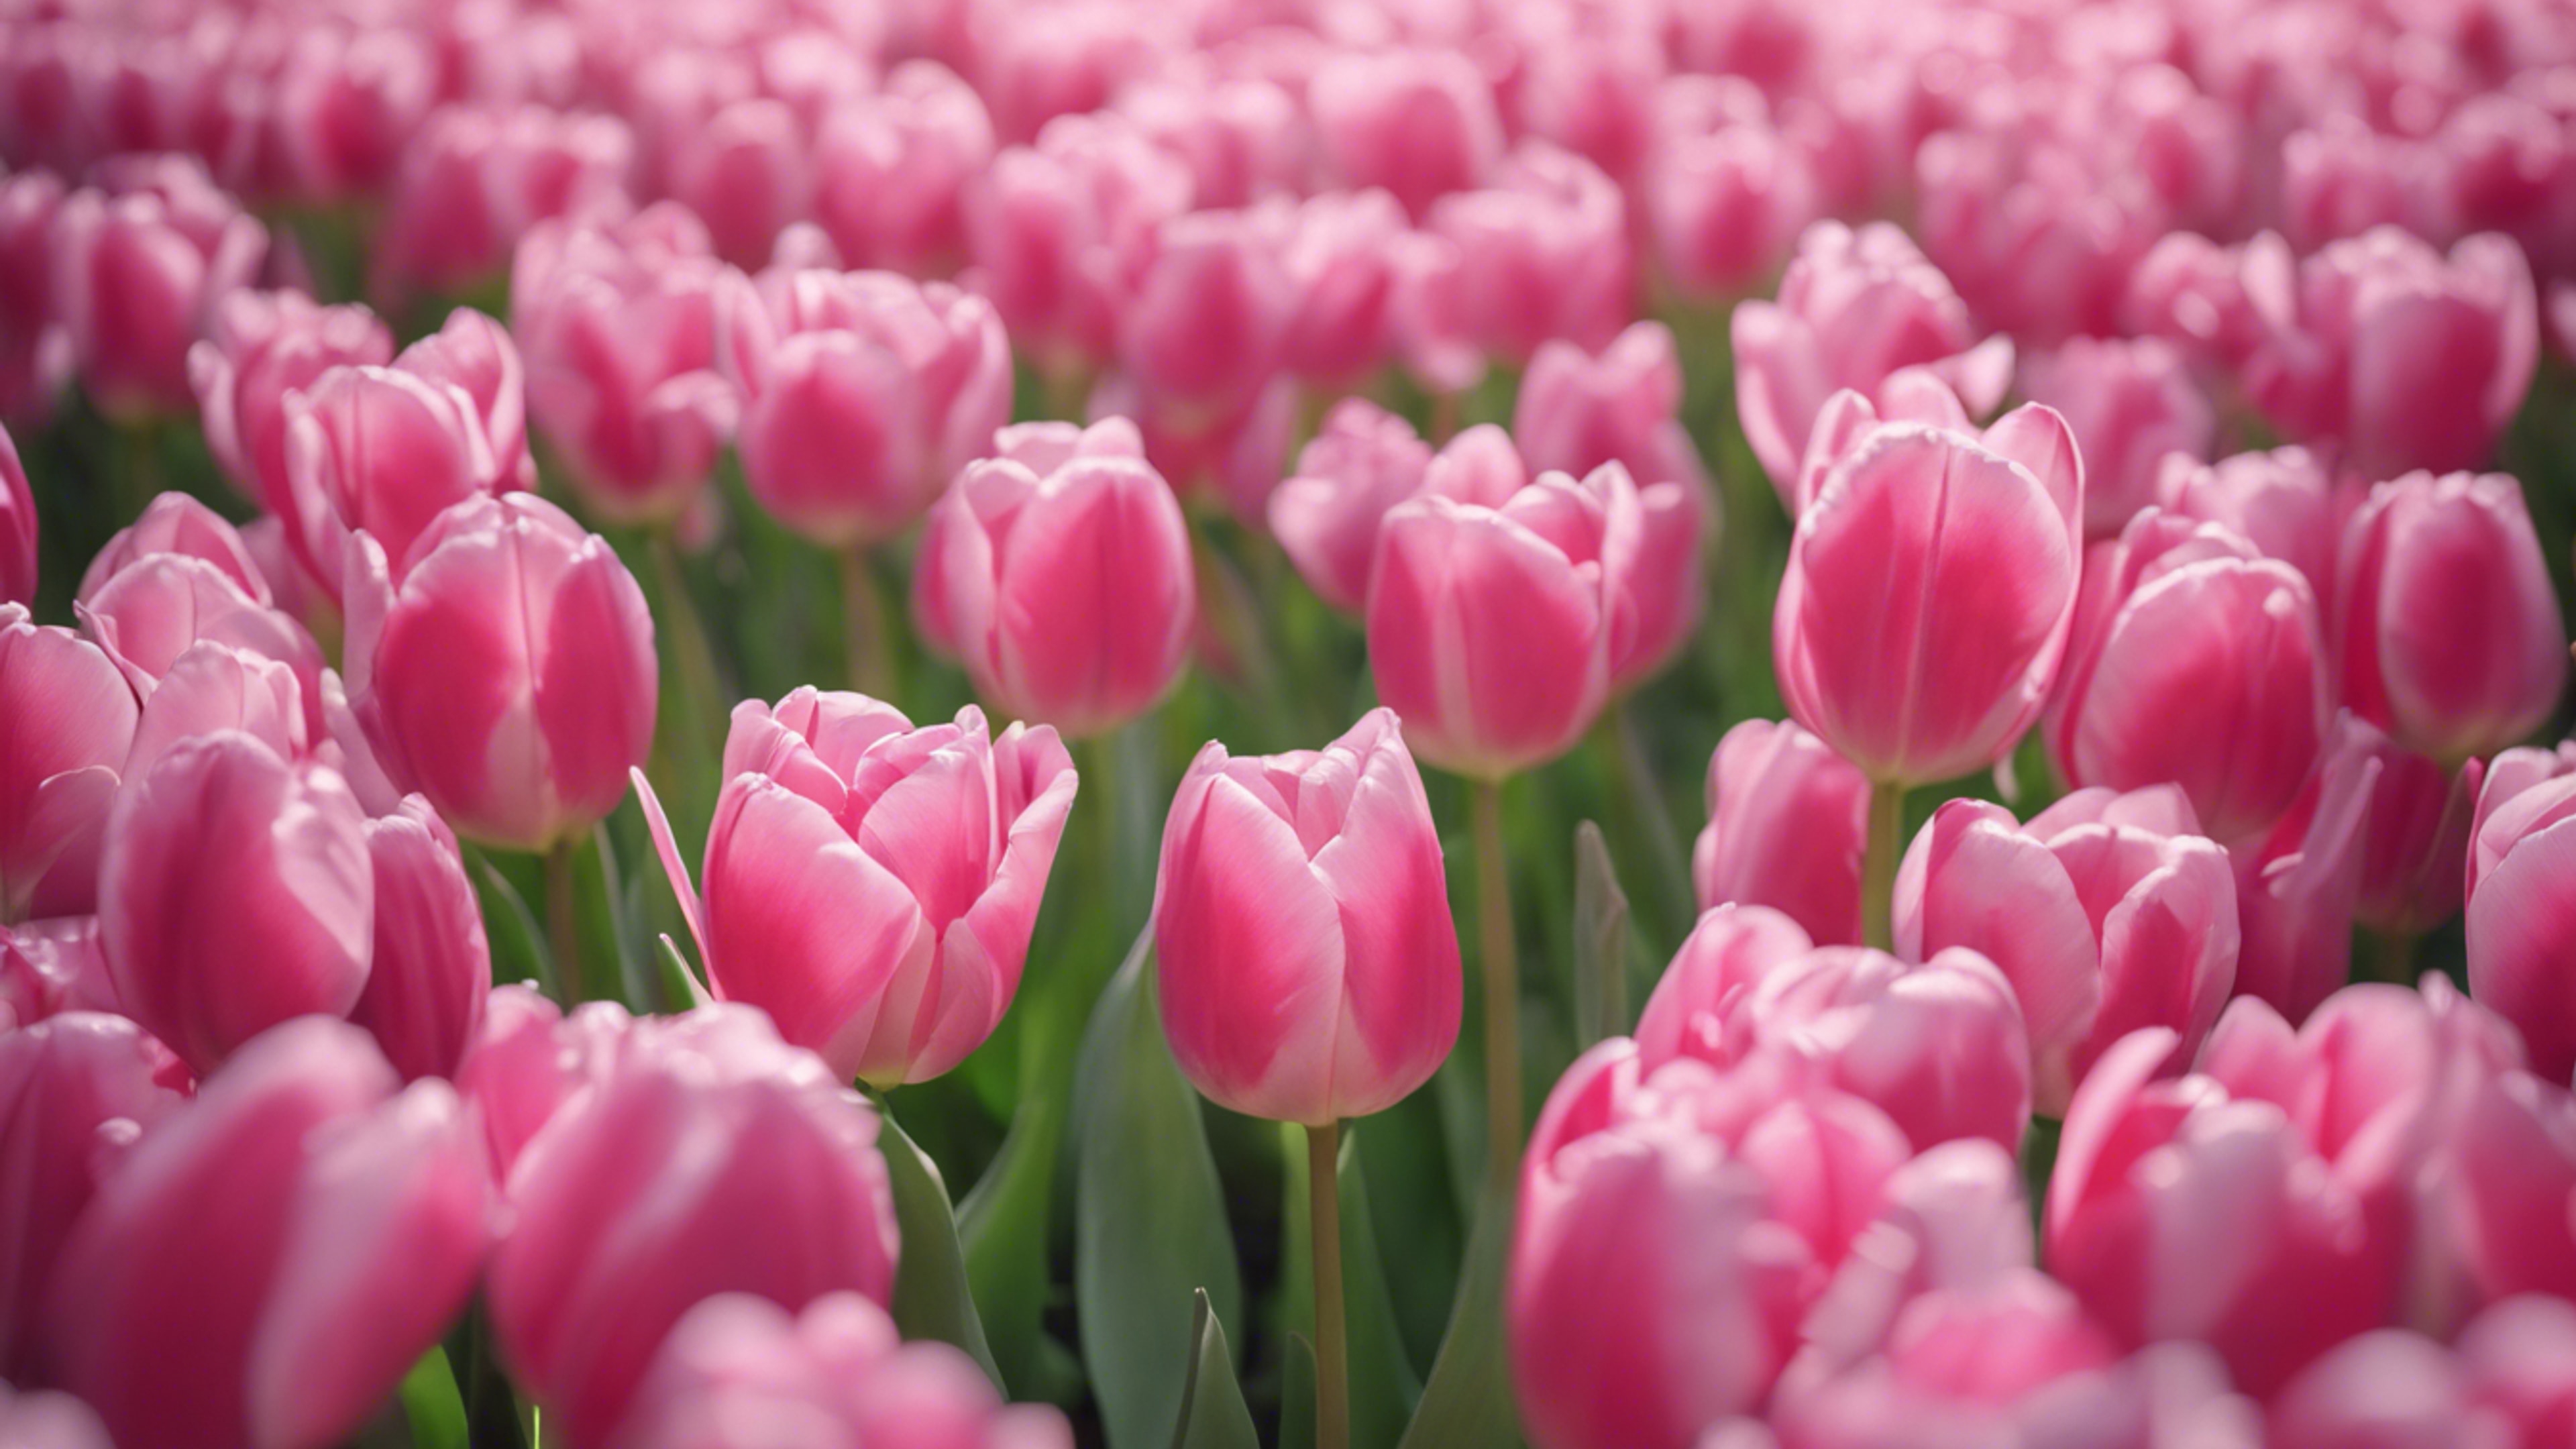 A group of pink tulips forming a perfect heart shape. Tapeet[03142173a34943bc92d4]